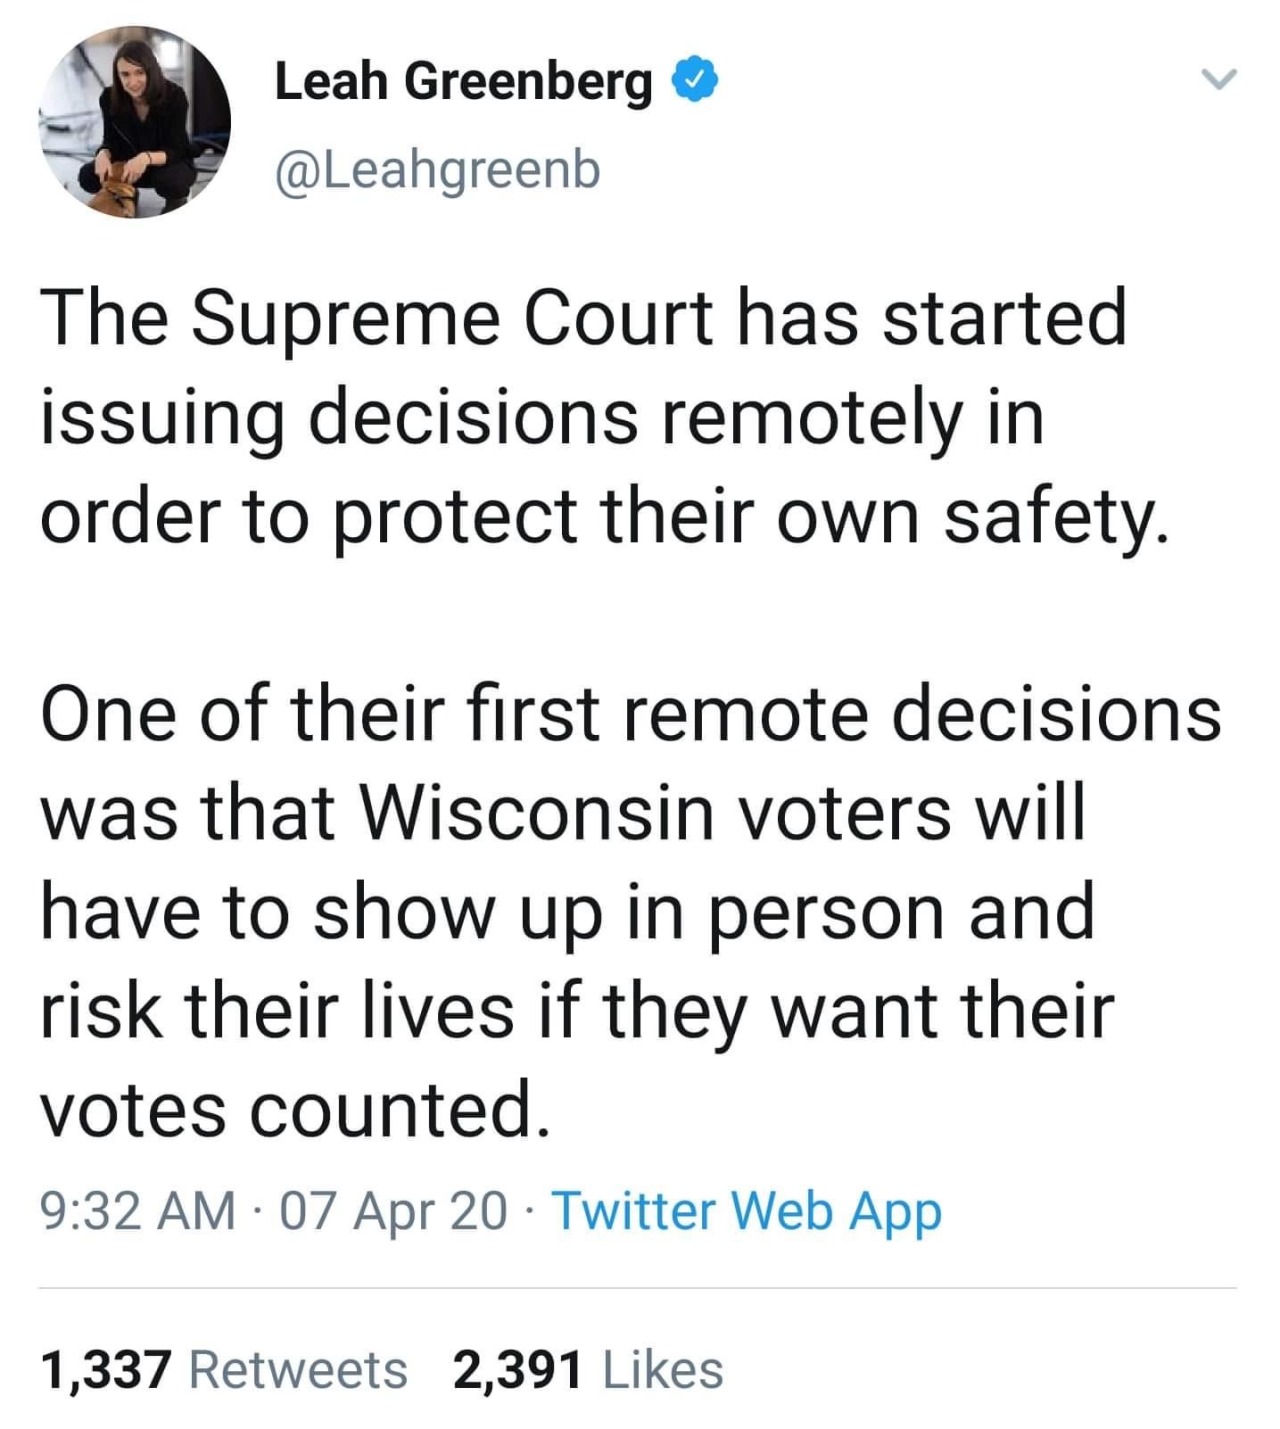 angle - Leah Greenberg The Supreme Court has started issuing decisions remotely in order to protect their own safety. One of their first remote decisions was that Wisconsin voters will have to show up in person and risk their lives if they want their vote